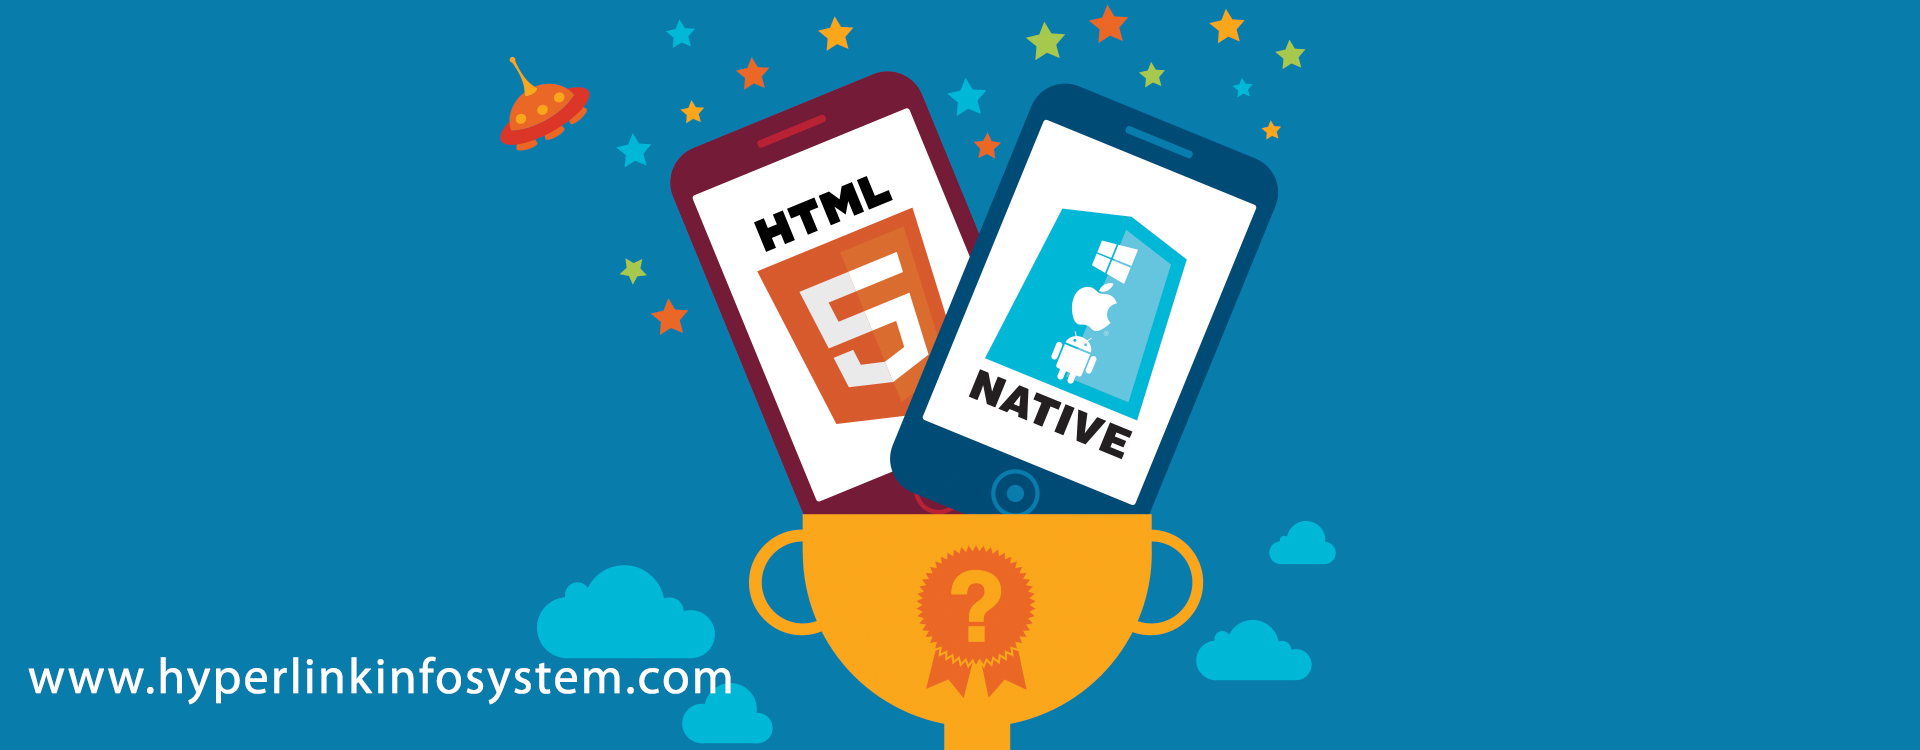 native, html5 or hybrid: which mobile application development options are fit for you?